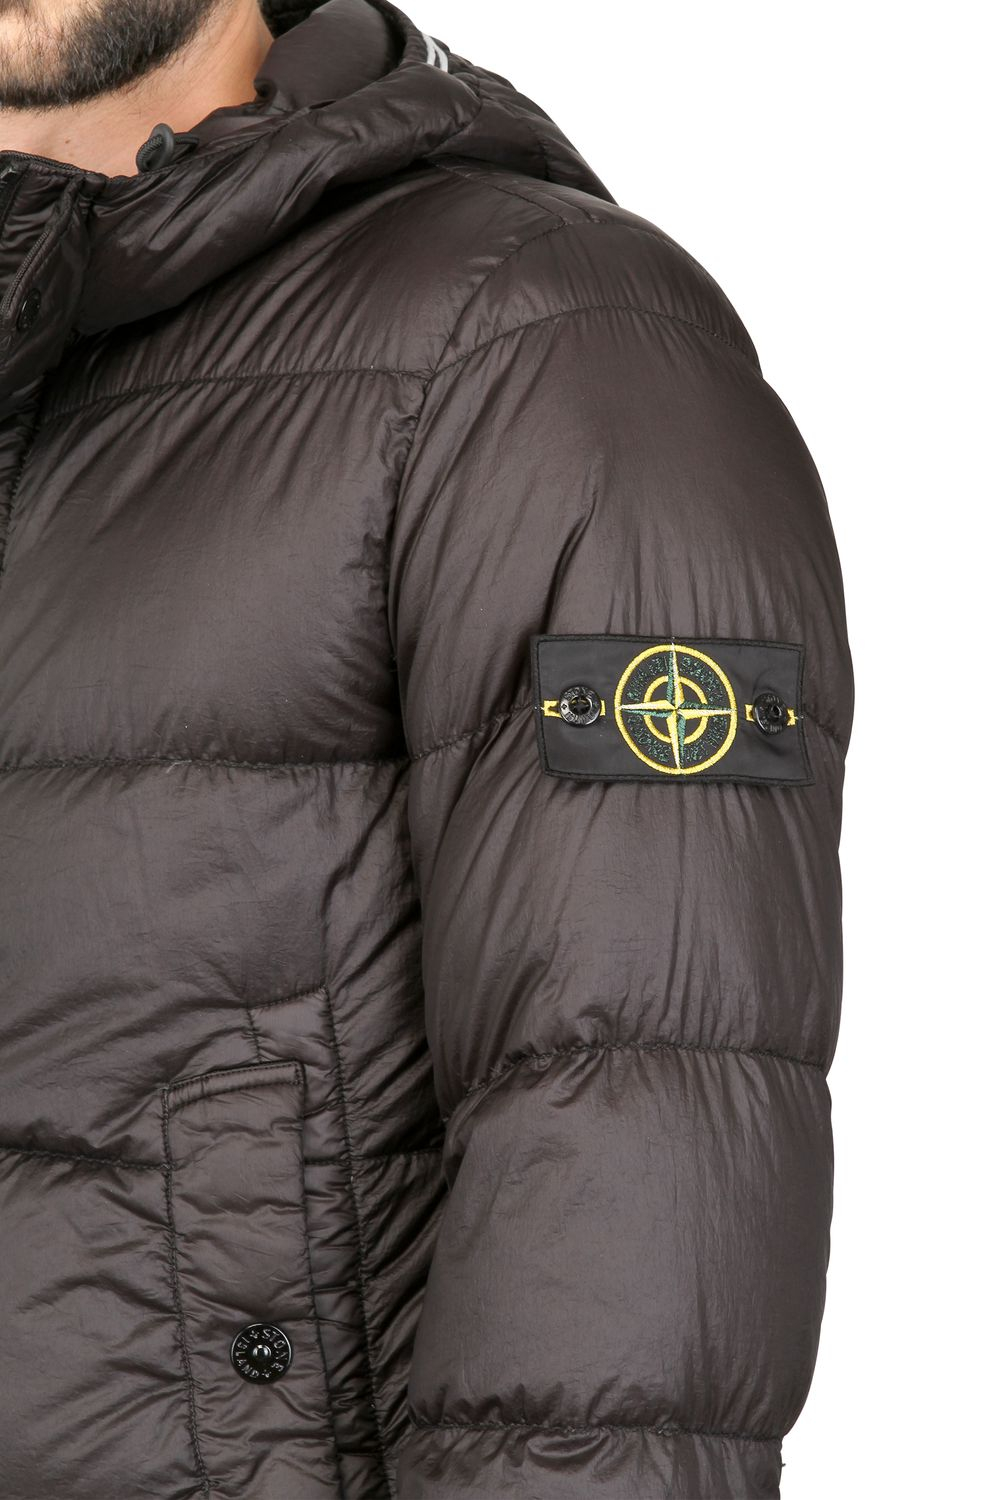 Stone Island Garment Dyed Nylon Hooded Down Jacket in Gray for Men - Lyst